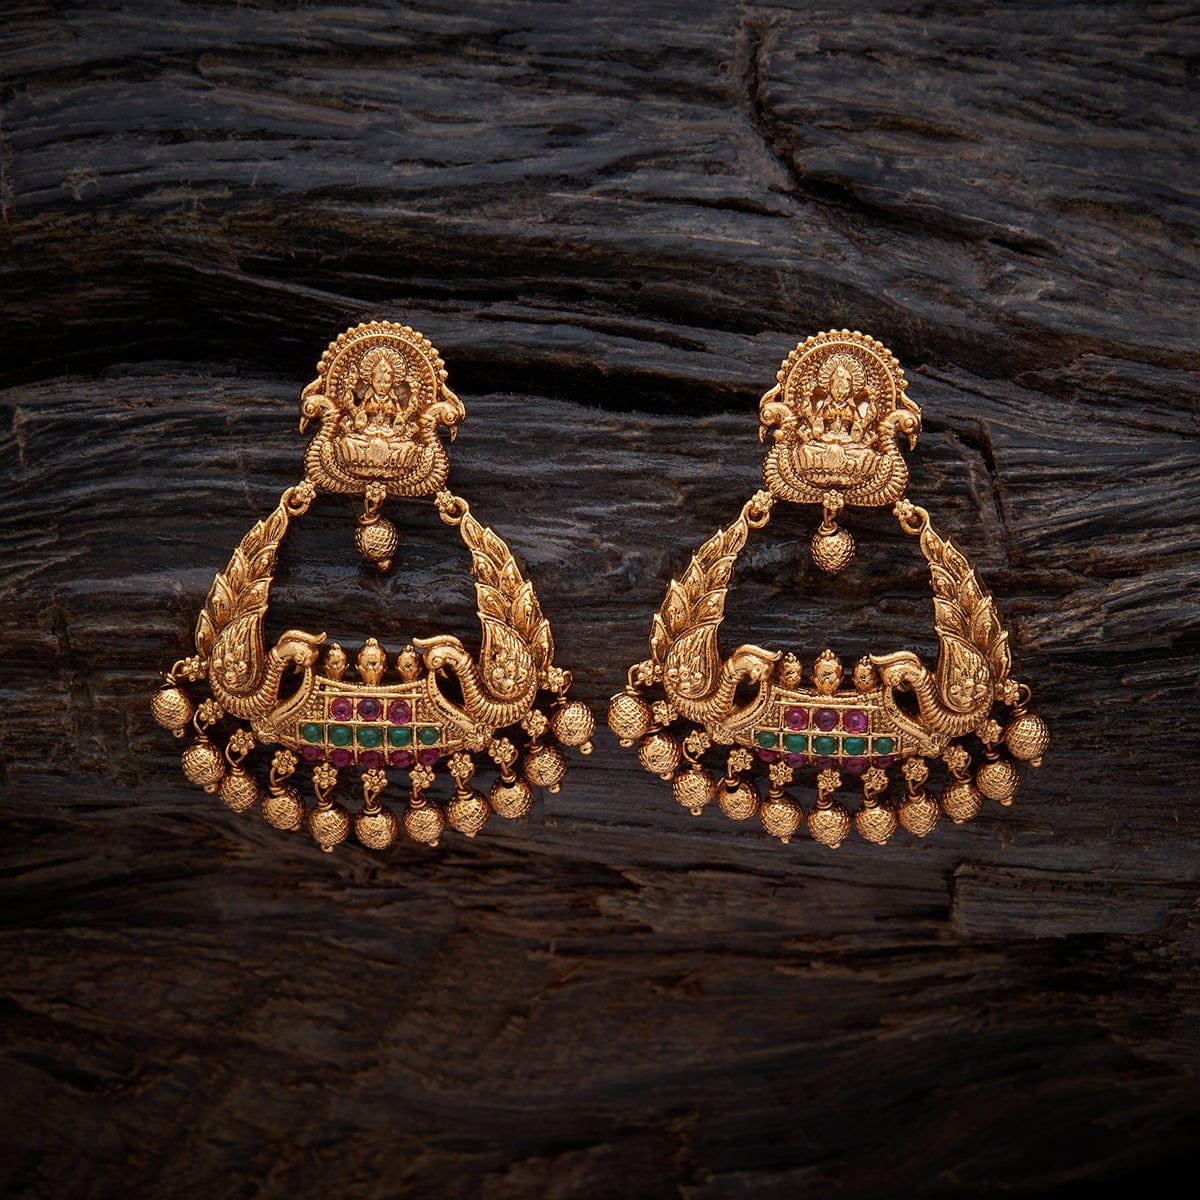 Buy Kushal's Fashion Jewellery Traditional Jhumkas with Hook in Gold Tone |  Festive Earrings with Pearl Detail at Amazon.in